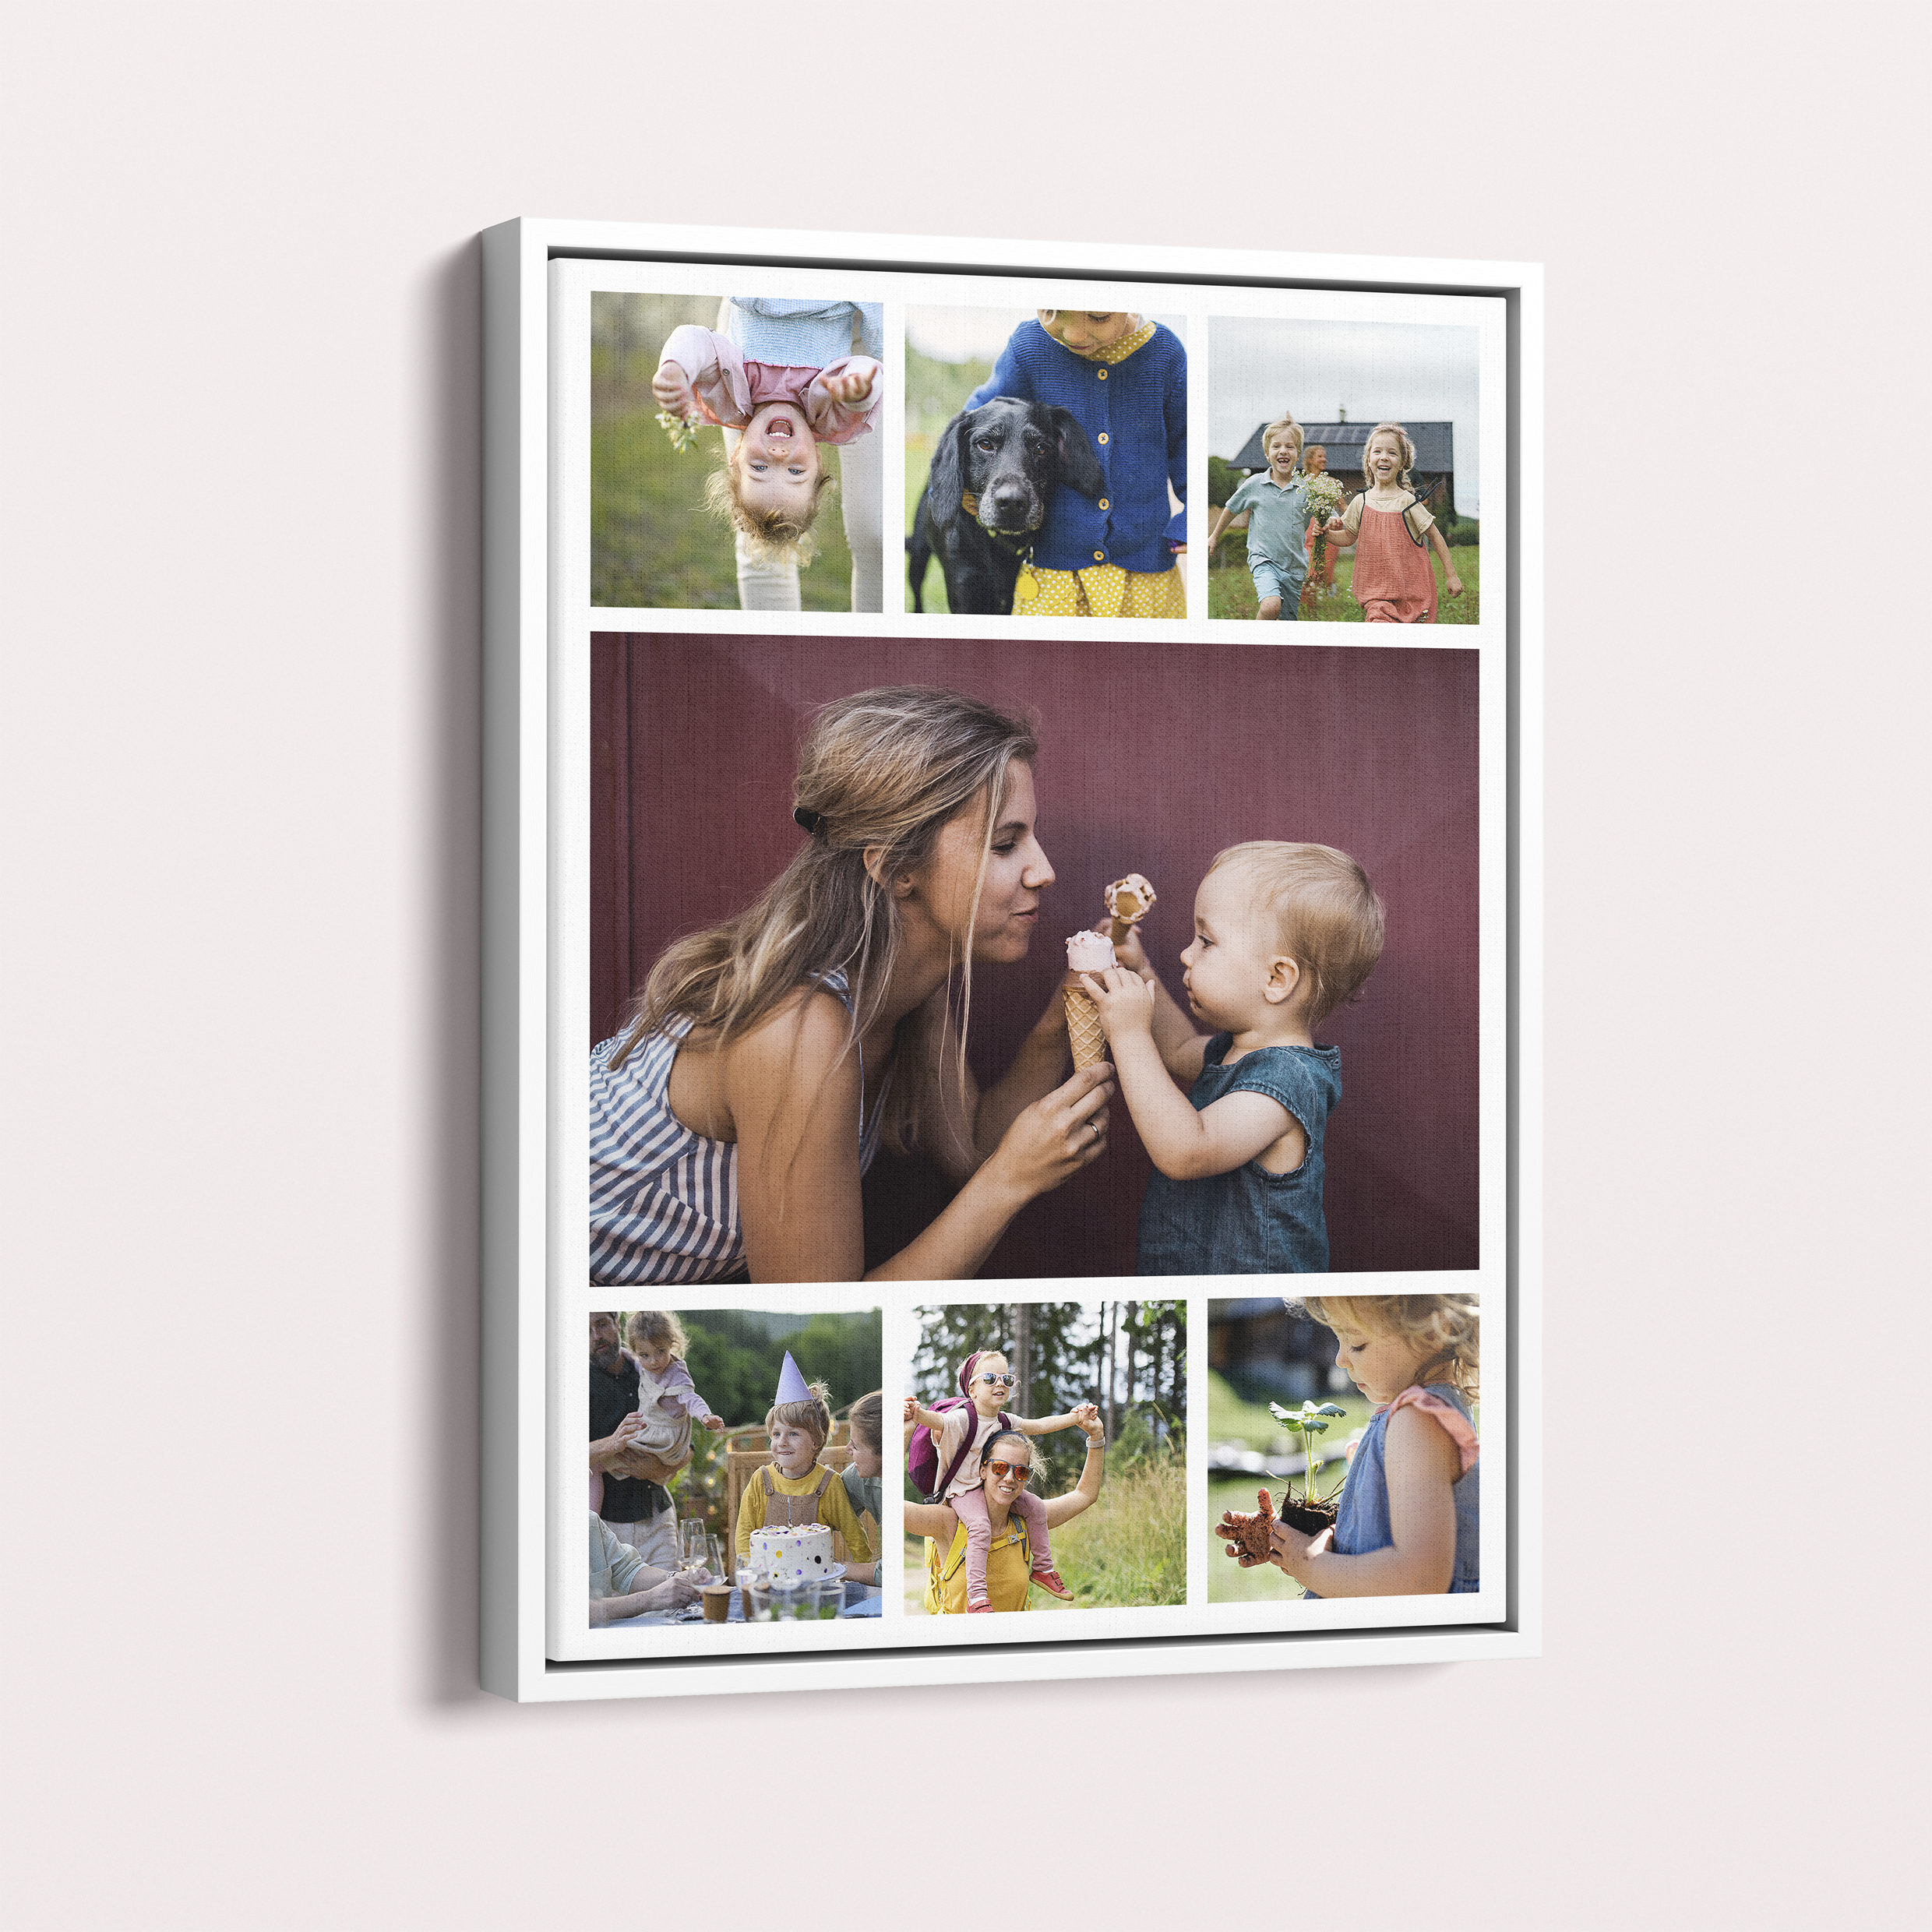  Personalized Tapestry of Time Framed Photo Canvases - Capture Your Memories in a Handmade Bespoke Canvas